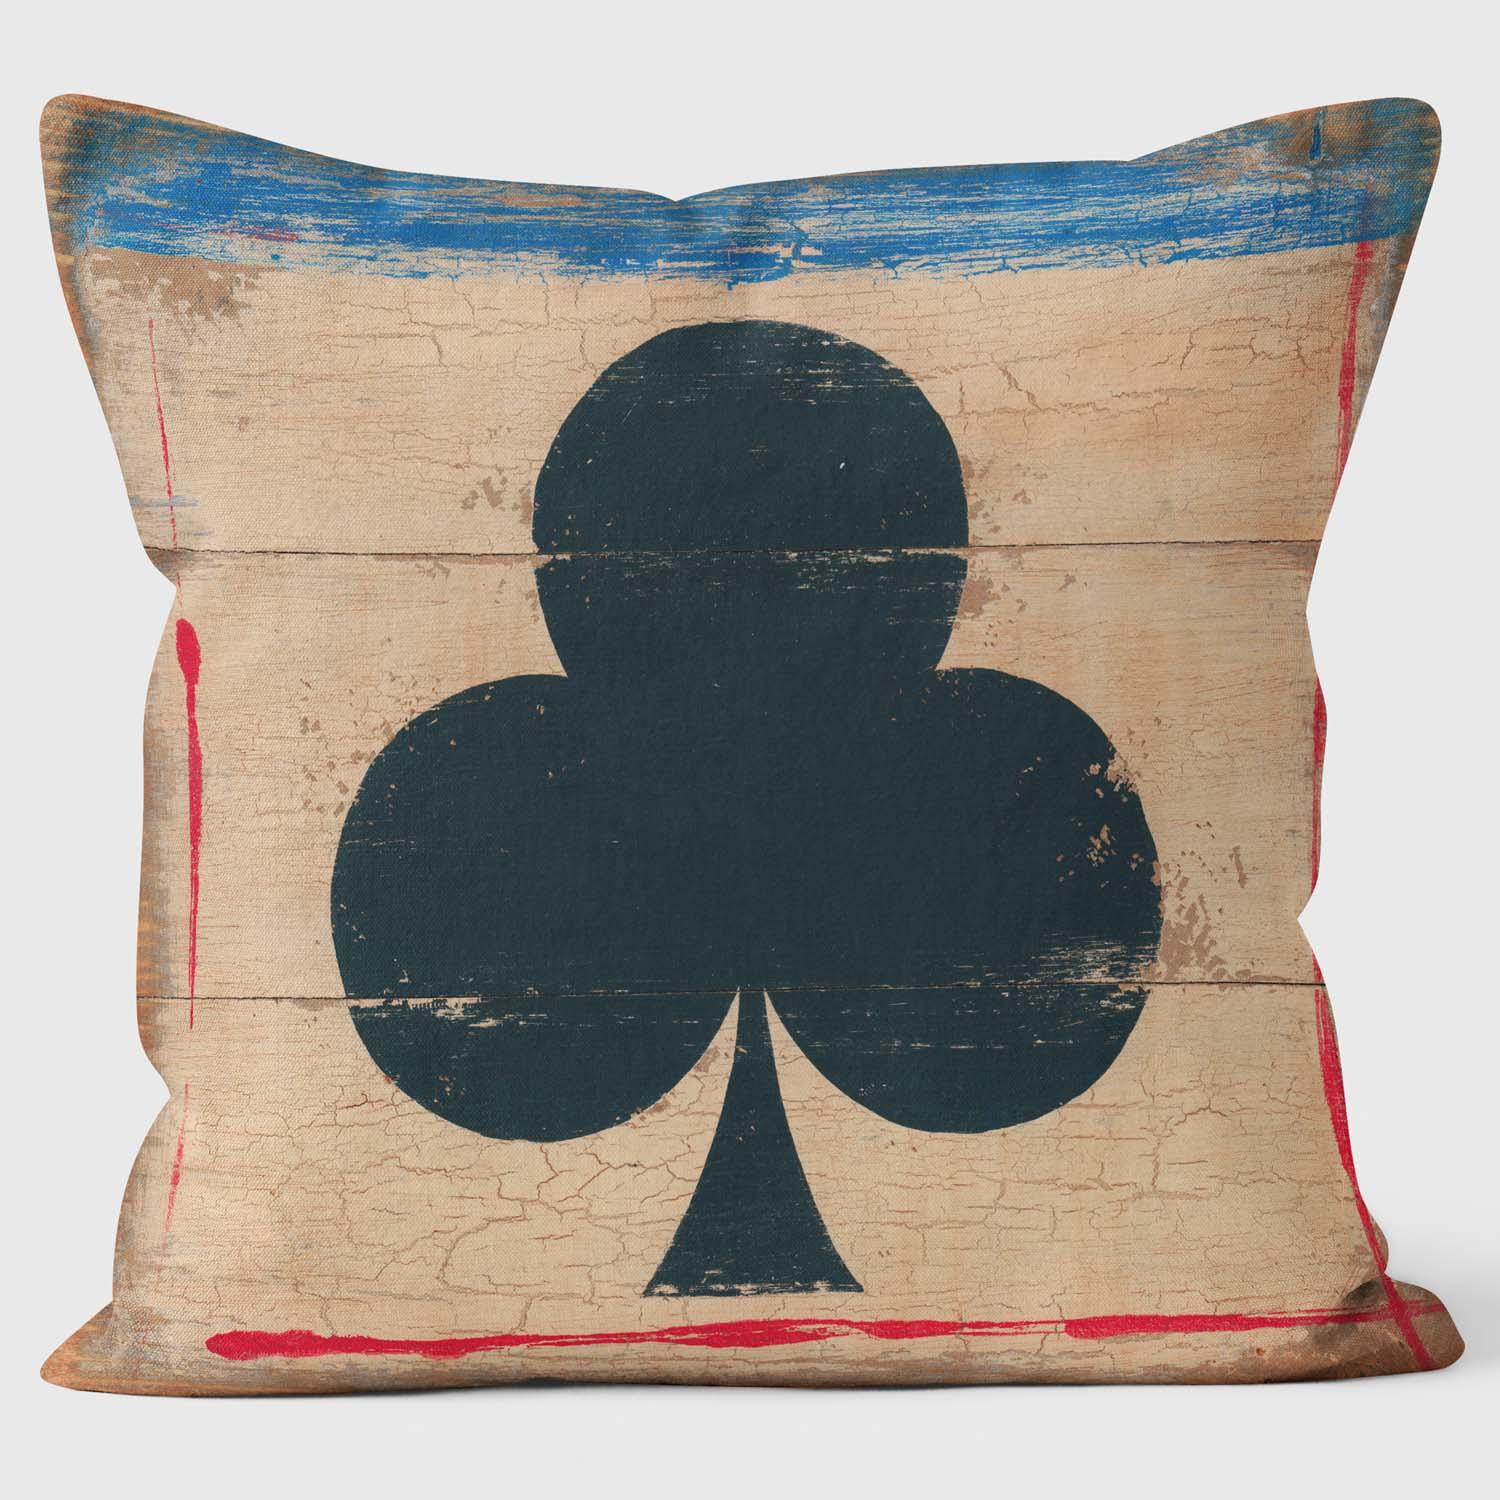 Clubs Pack Of Cards - Martin Wiscombe Cushion - Handmade Cushions UK - WeLoveCushions